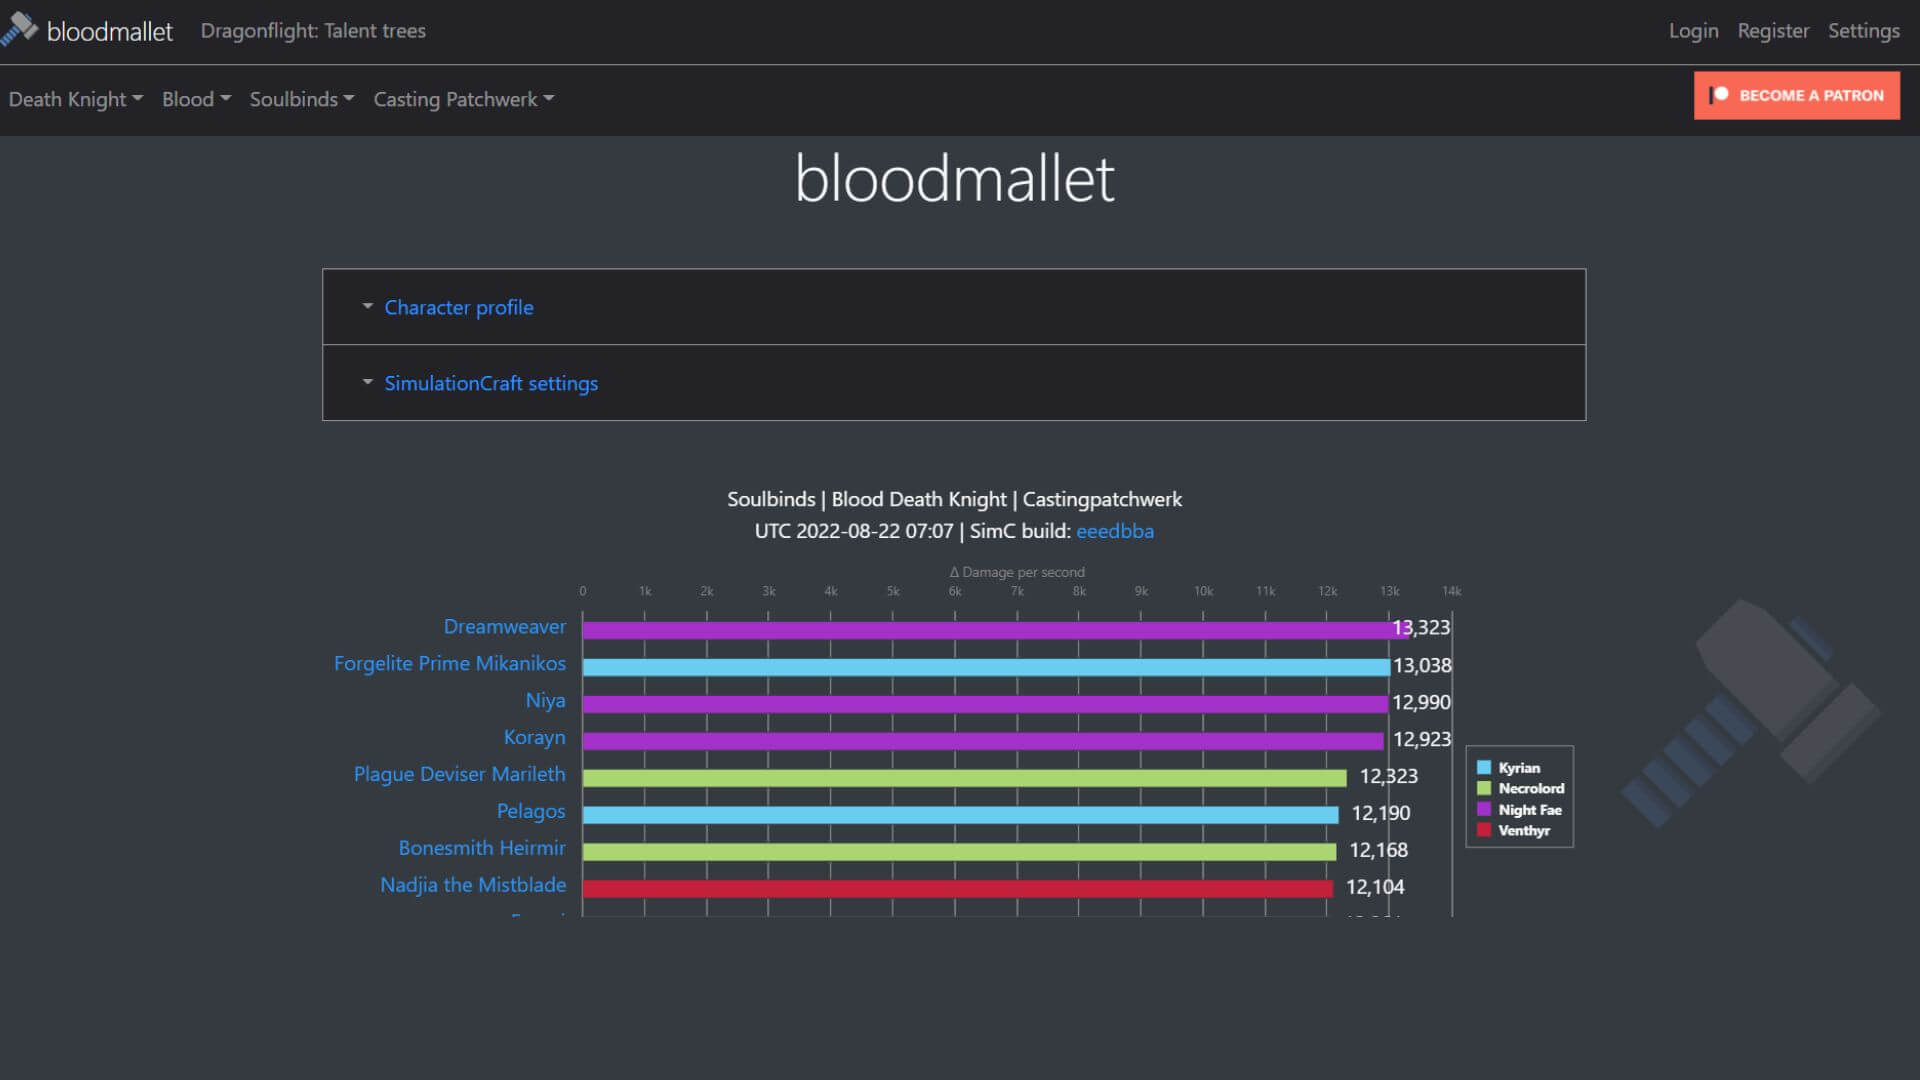 Bloodmalle | Analytics of traffic and market share